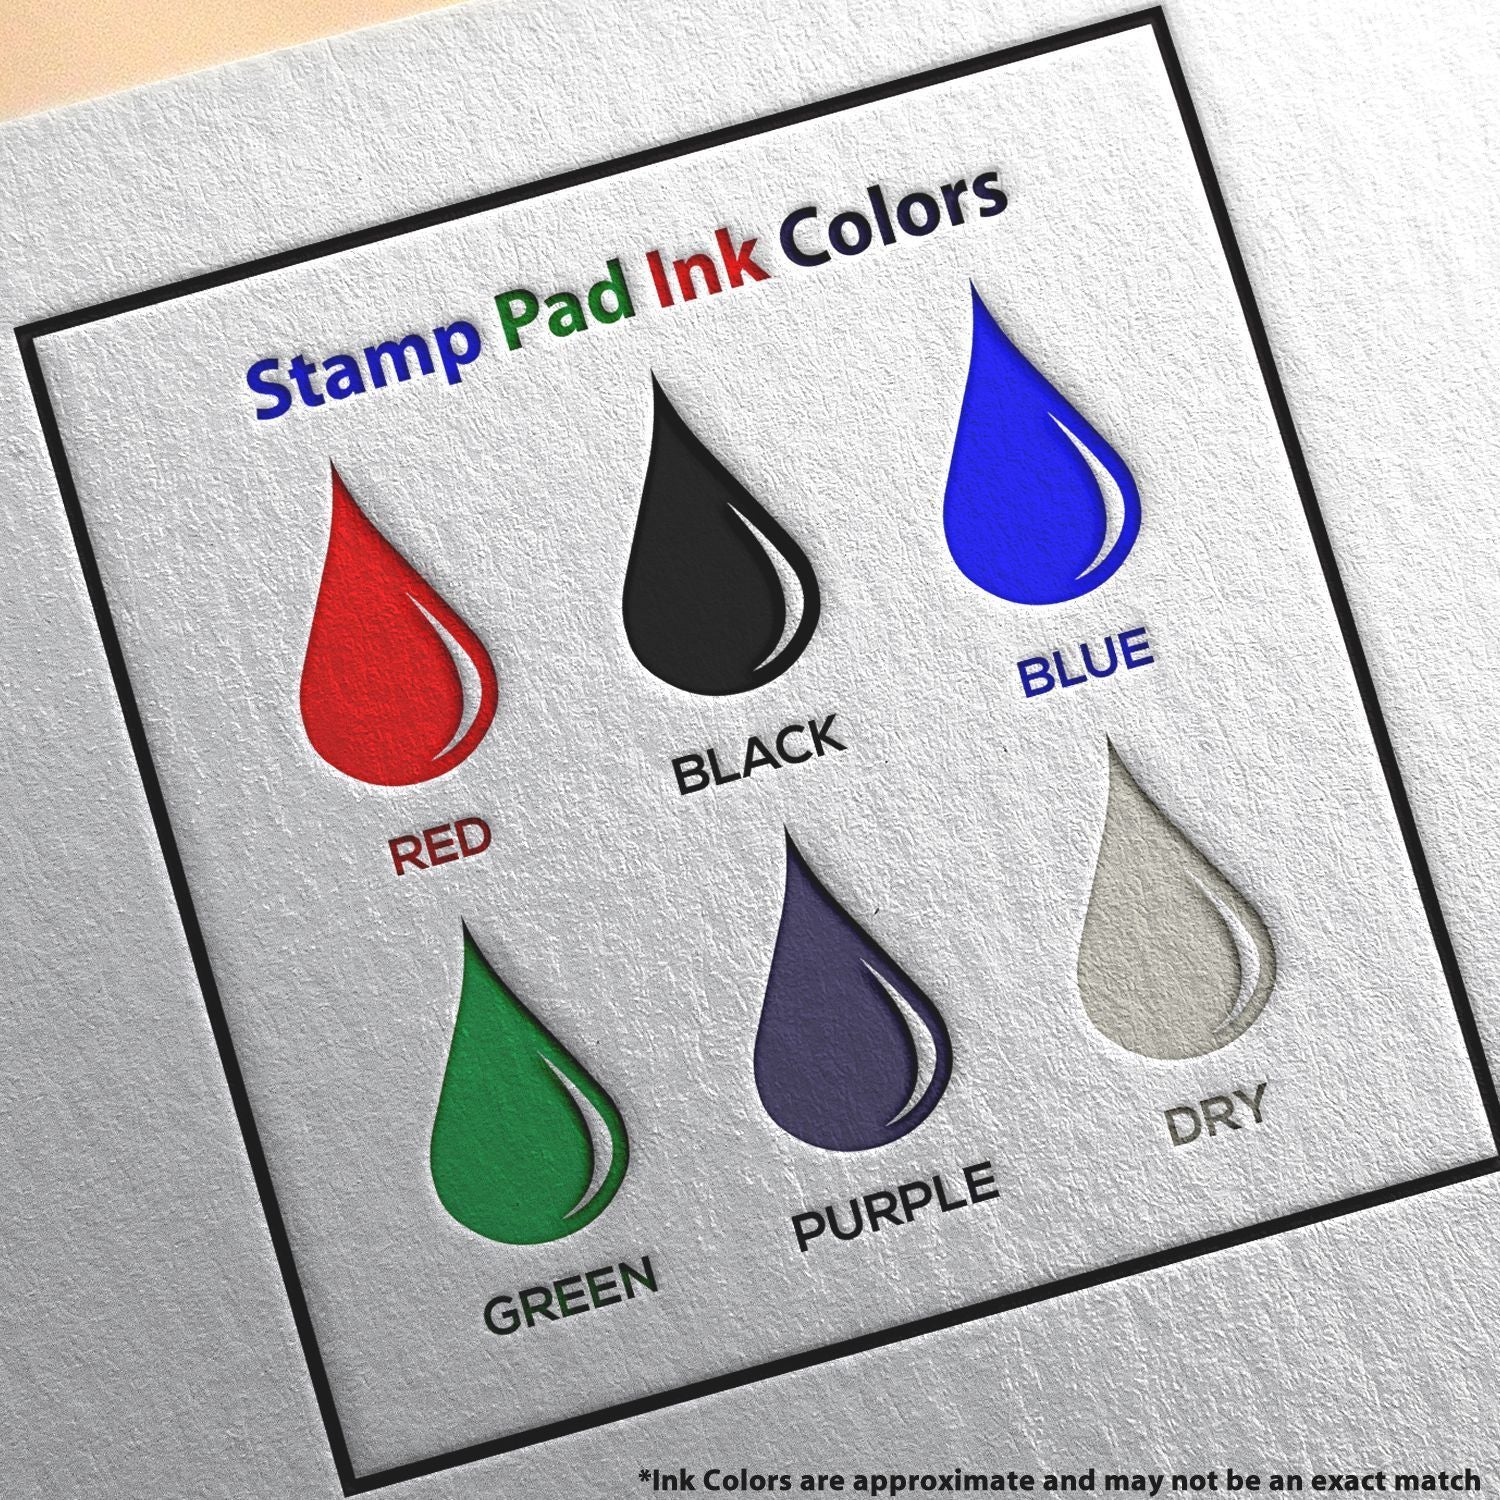 One Color Replacement Ink Pad For Hm 6014 And Hm 6114 Black